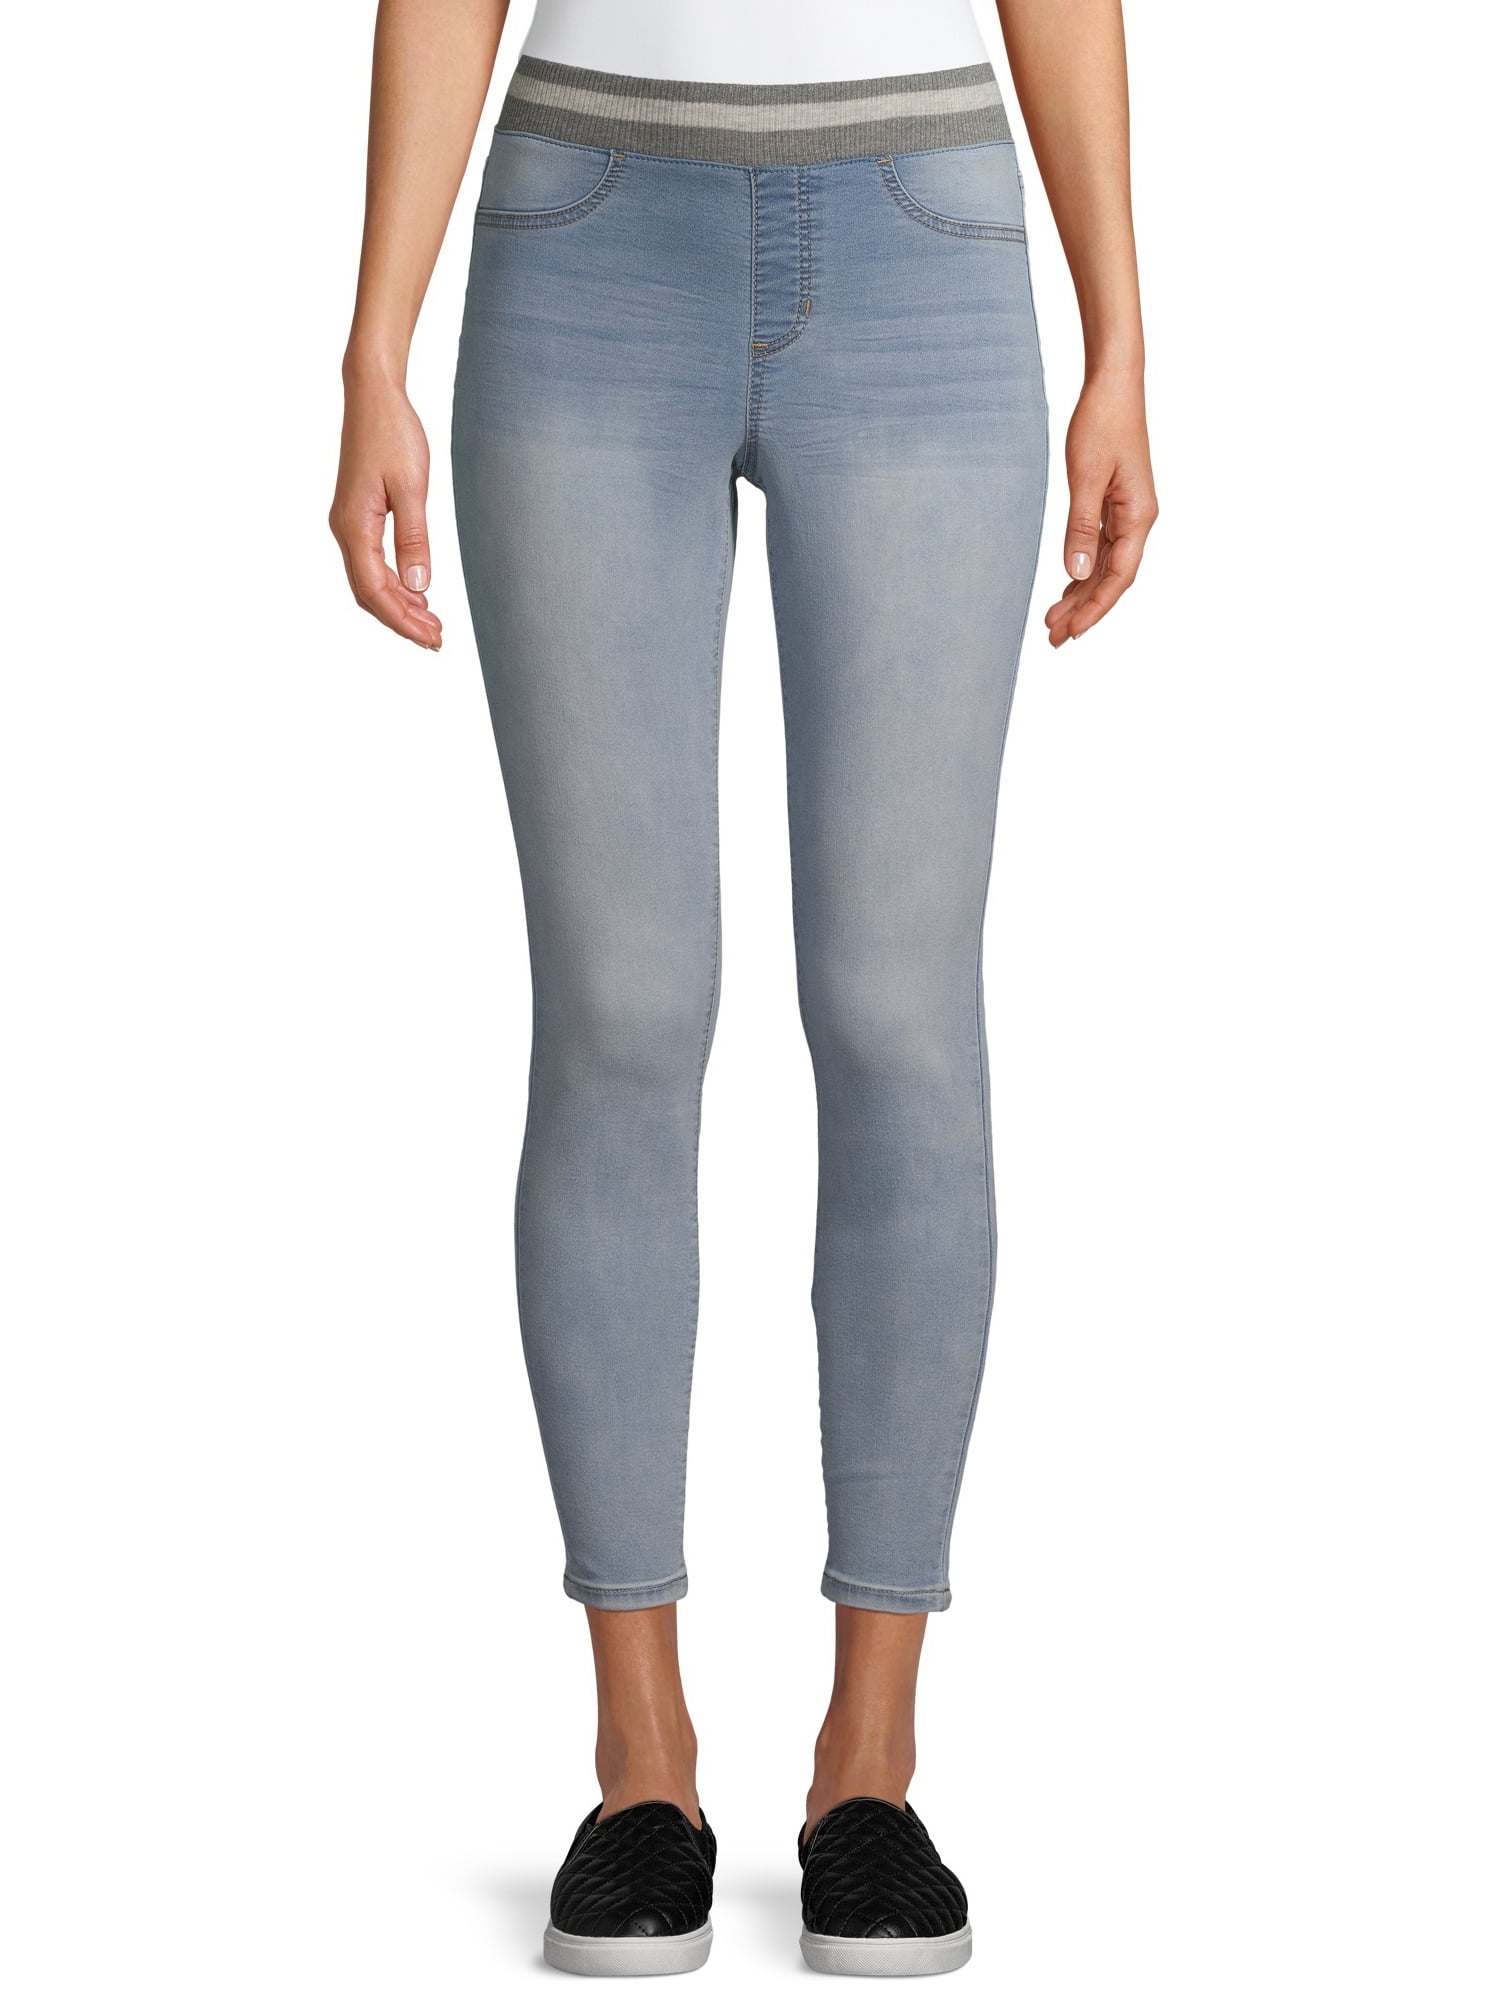 Juniors By Lifestyle Jeggings - Buy Juniors By Lifestyle Jeggings online in  India